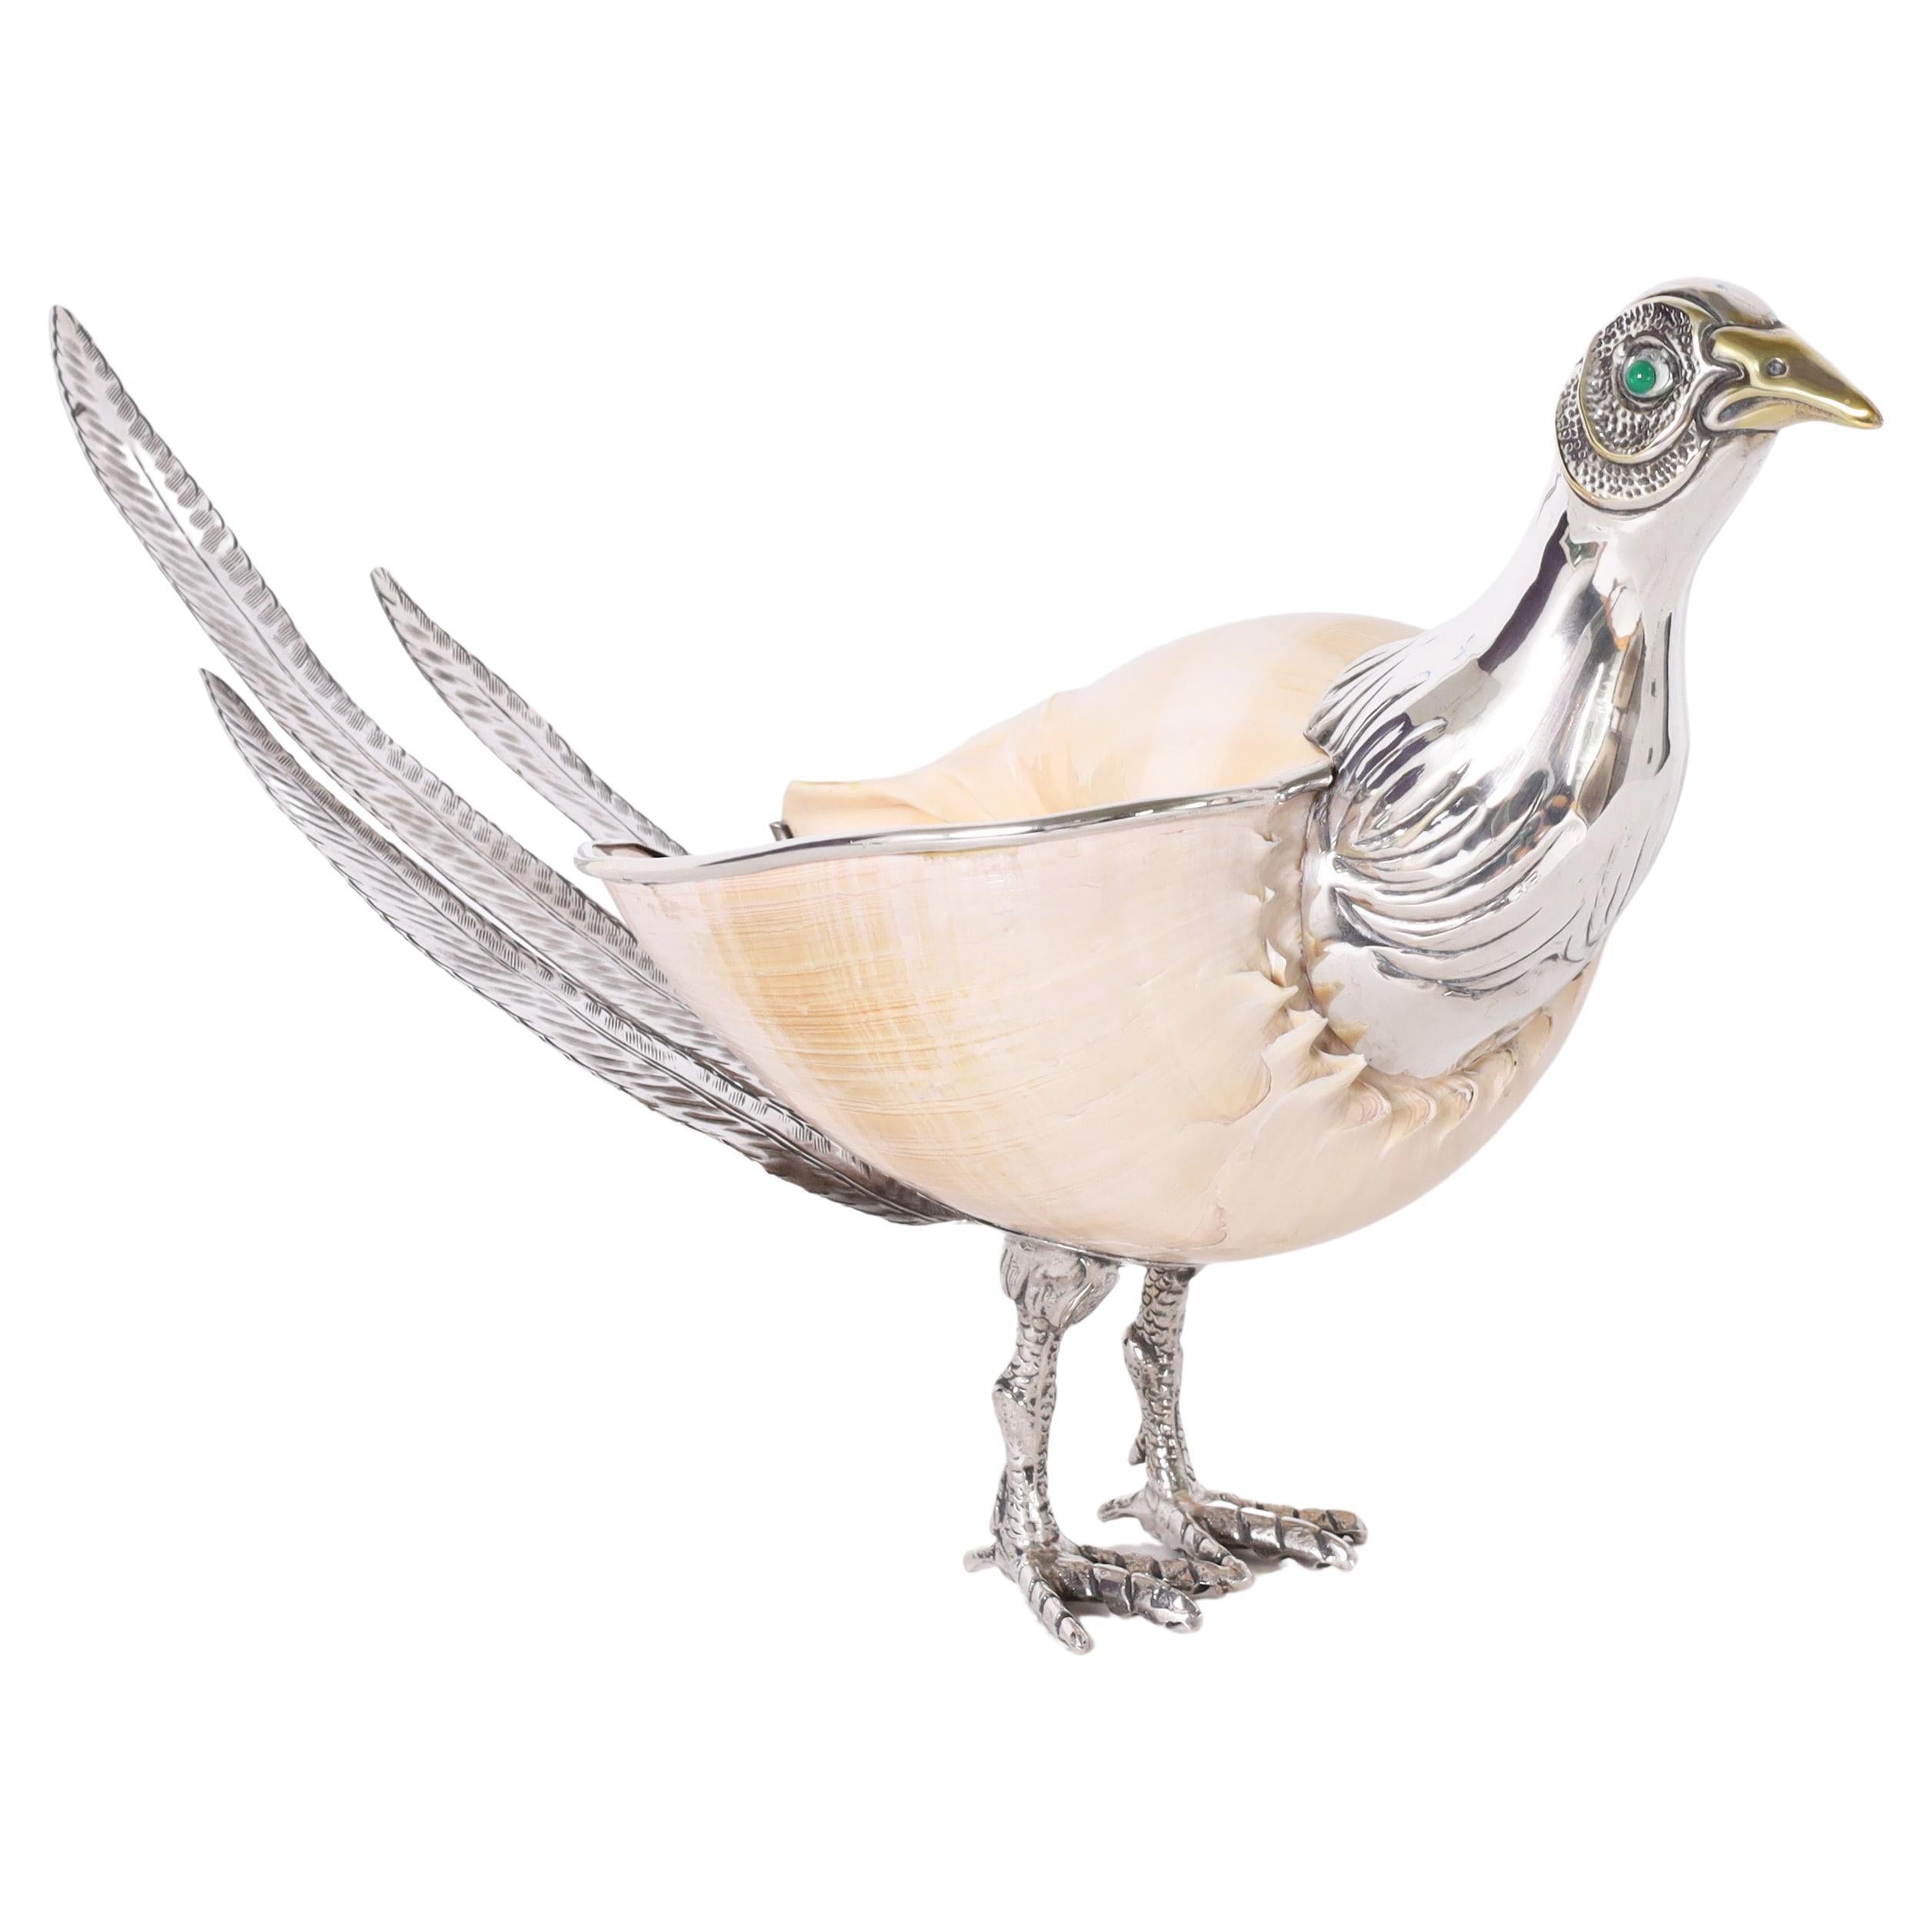 Vintage Silver Plate and Conch Shell Bird Sculpture by Binazzi